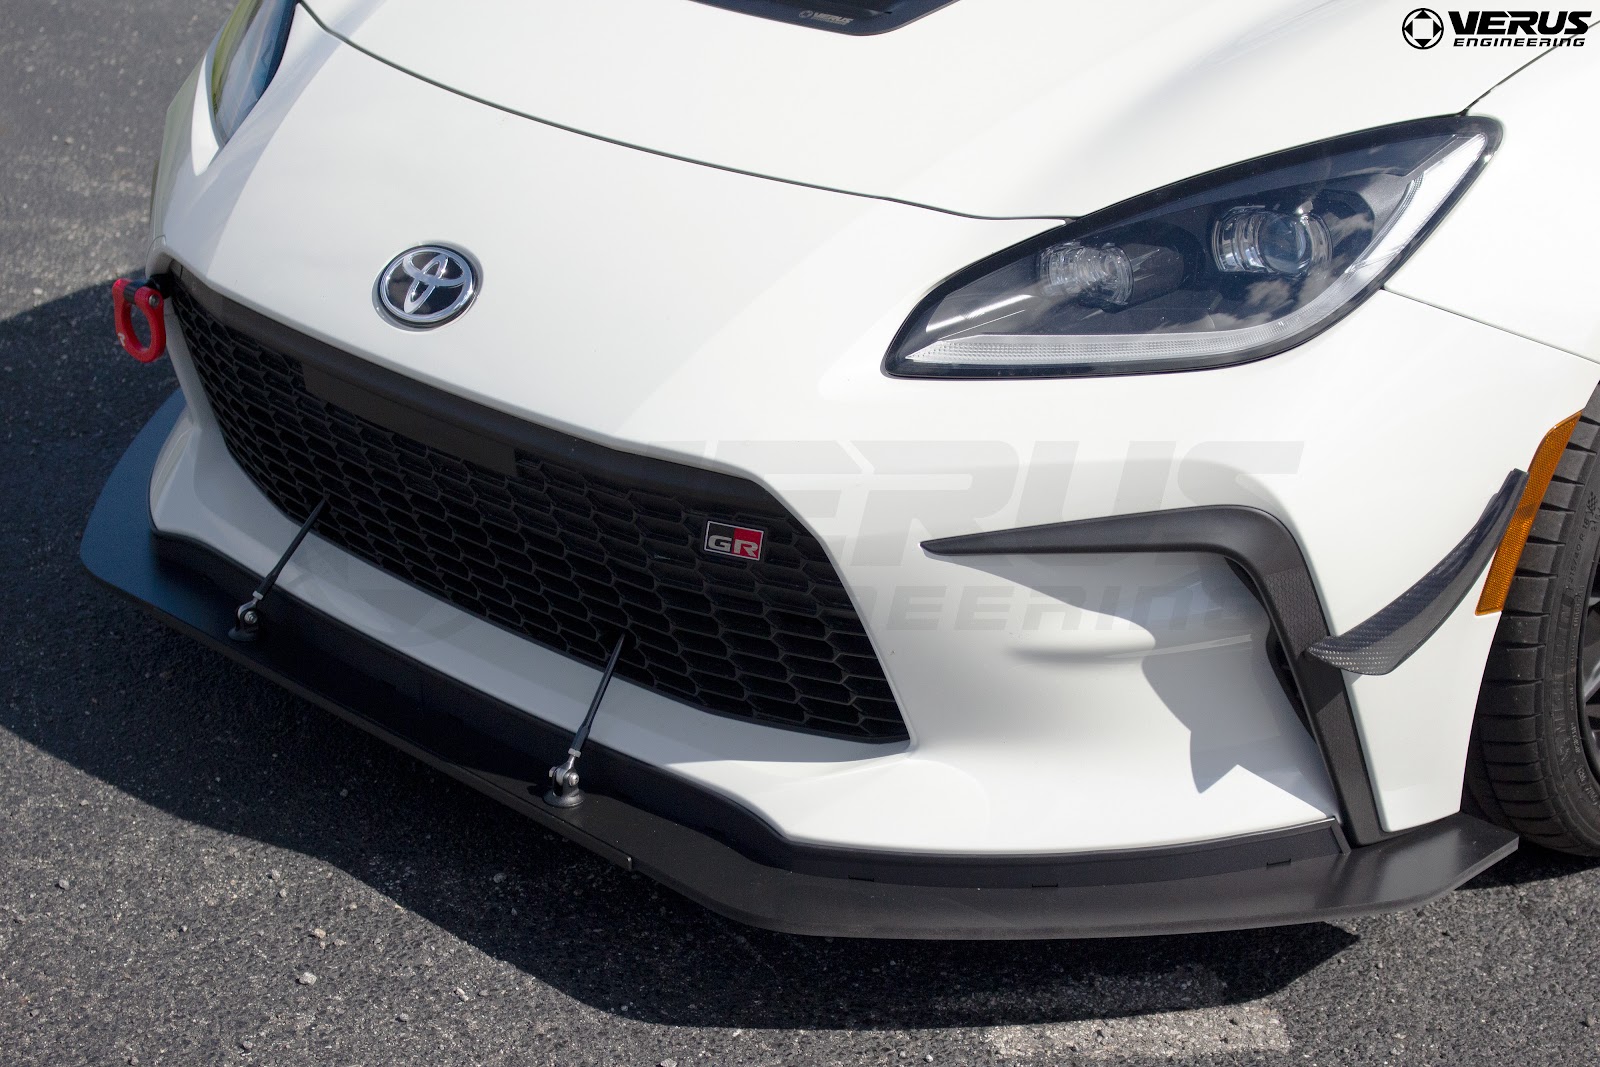 Front splitters increase downforce on a Toyota GR